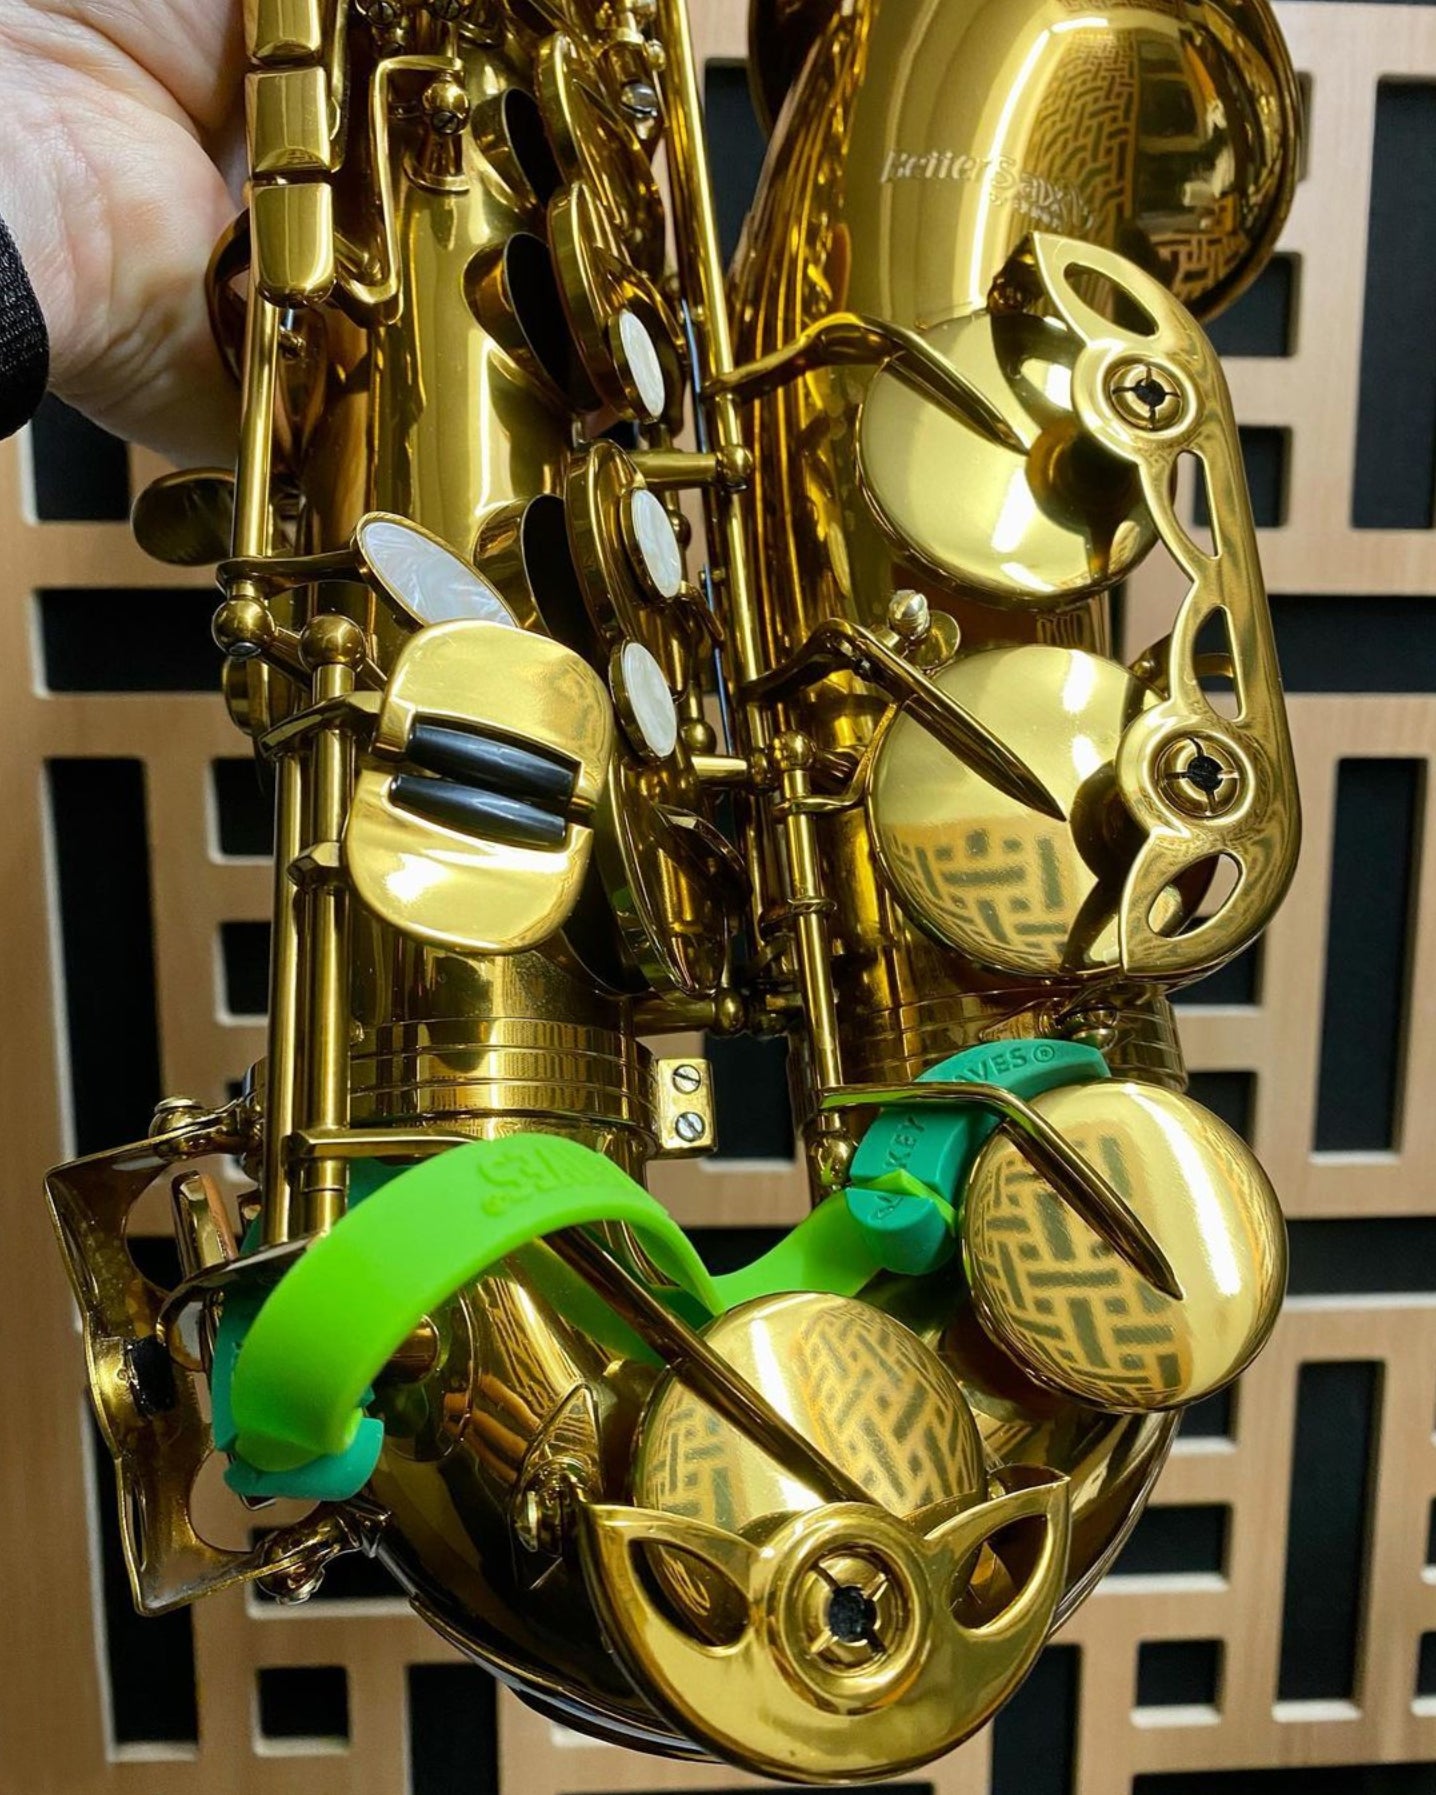 Green Key Leaves saxophone key props used on a gold Better Sax alto saxophone from Conn-Selmer